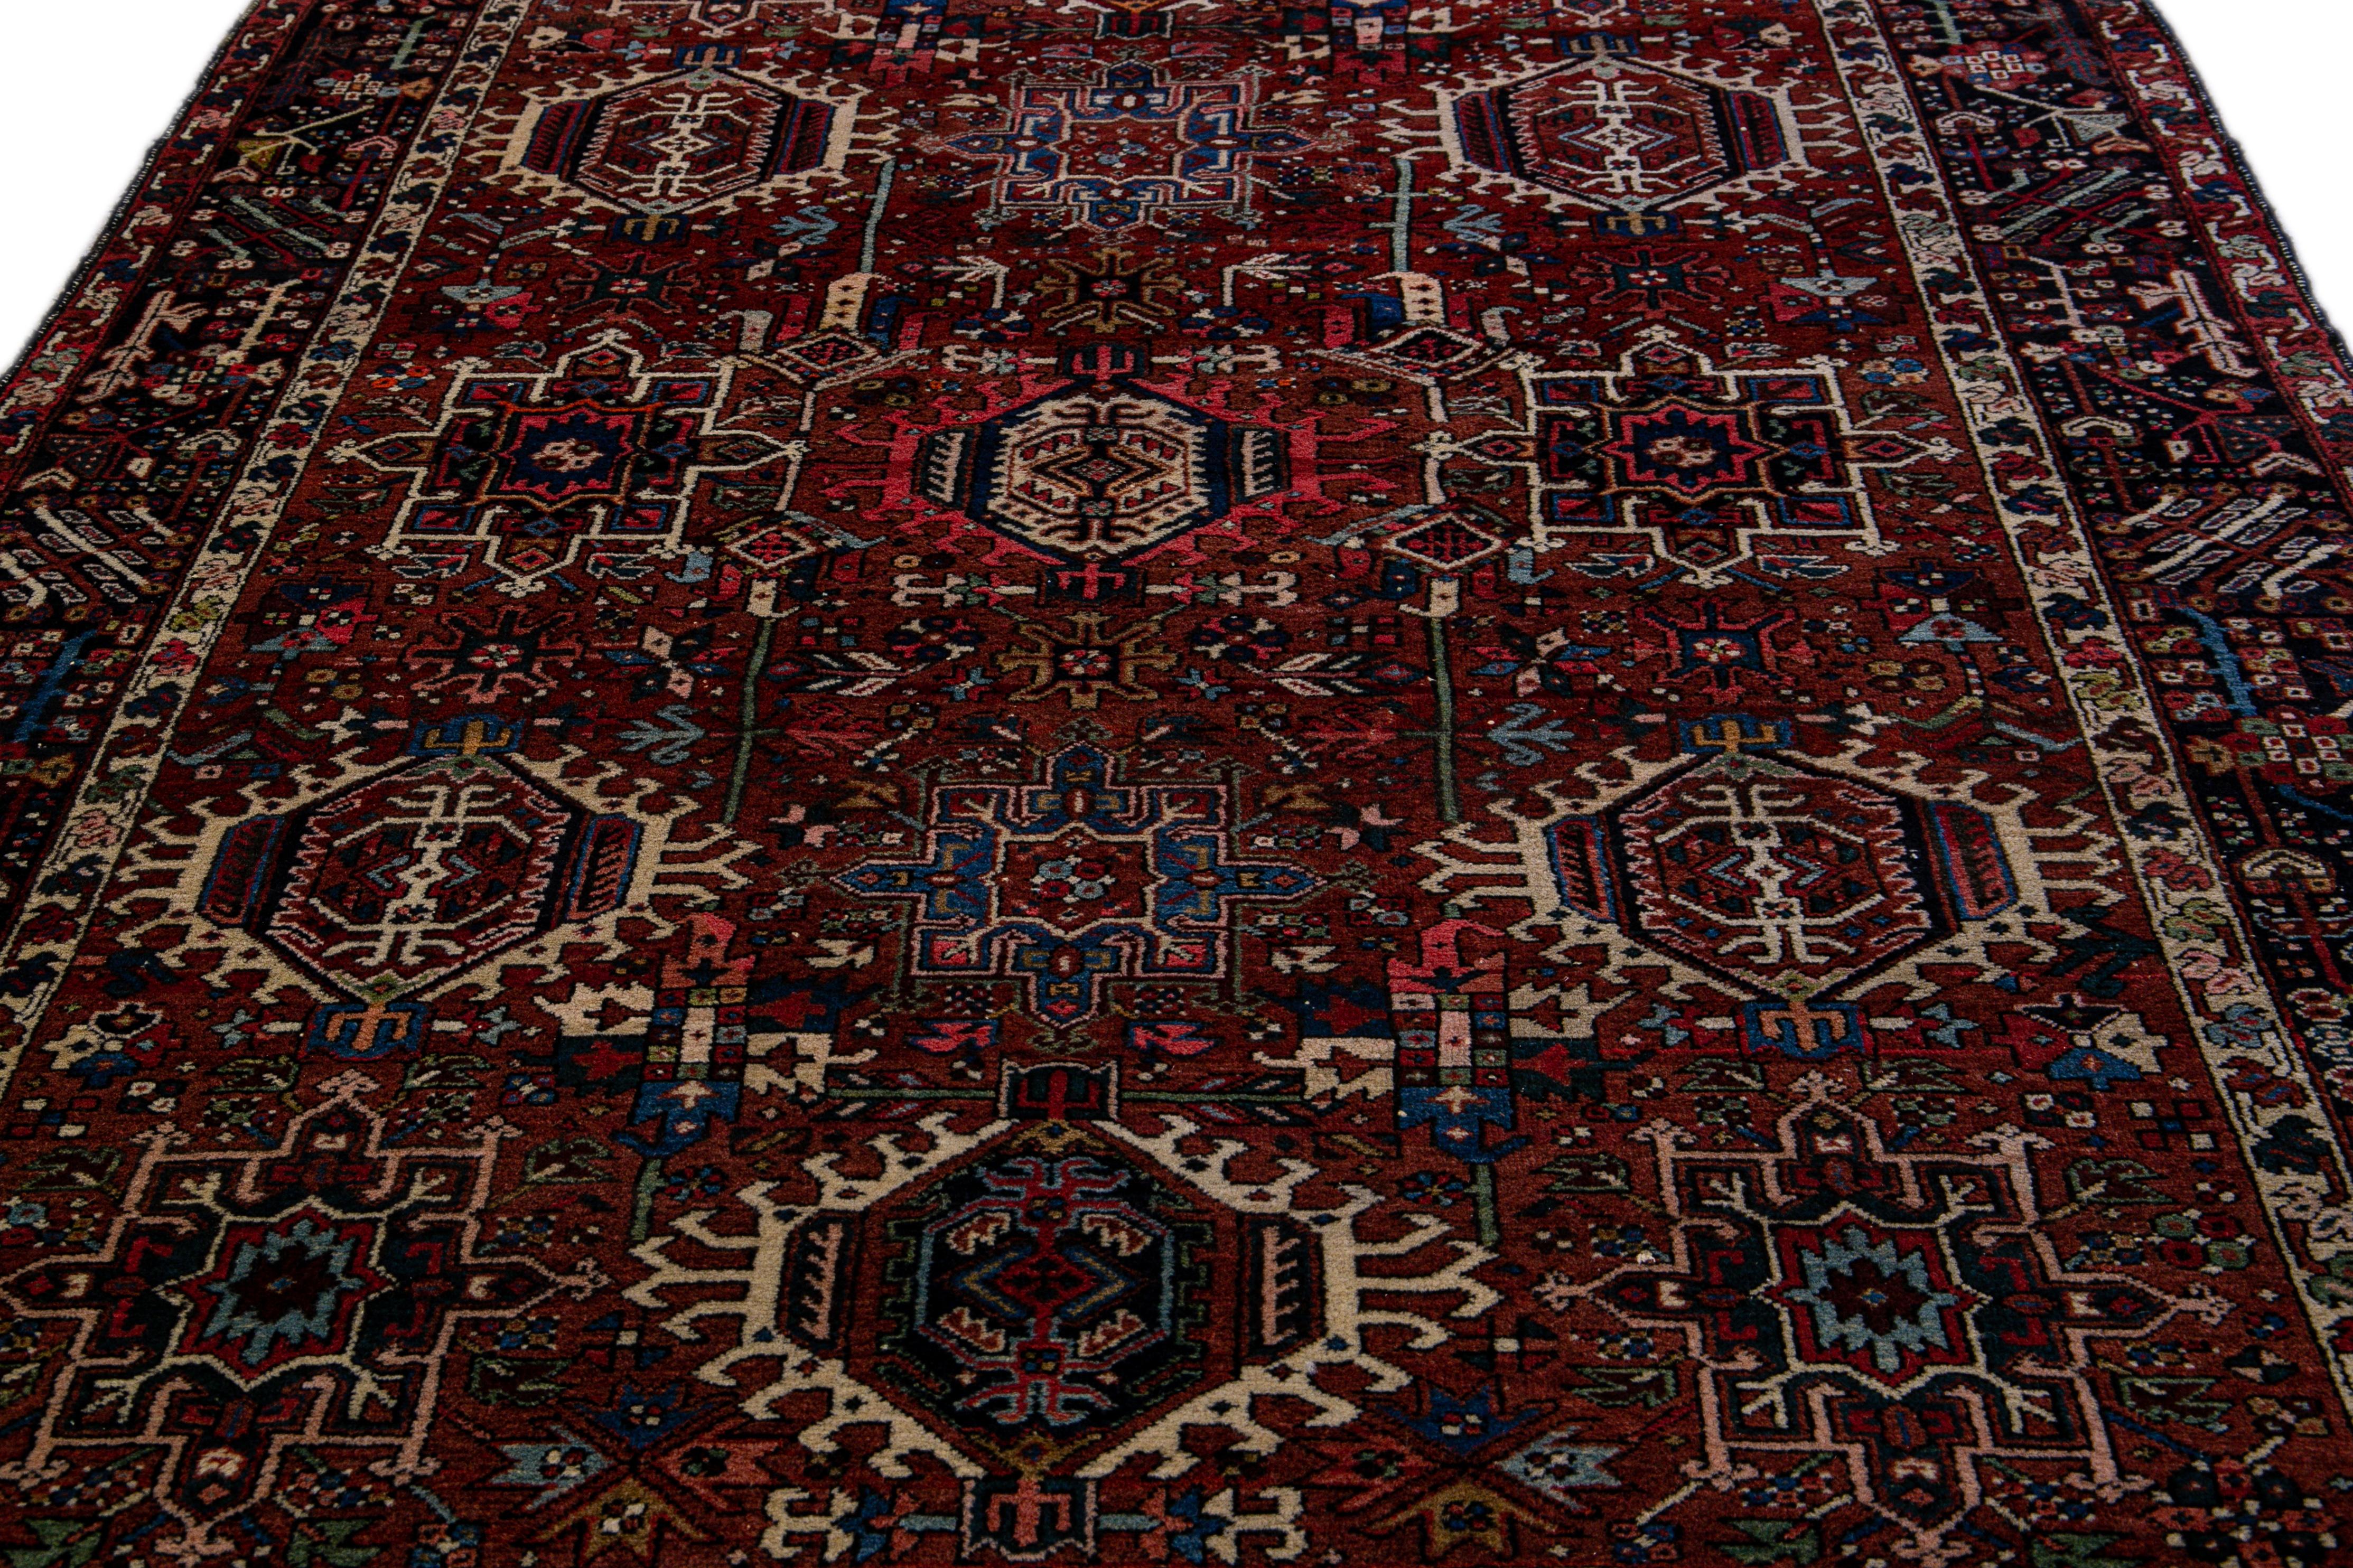 Beautiful antique Heriz hand-knotted wool rug with a rust field. This rug has a blue frame and multicolor accents in a gorgeous all-over geometric medallion floral design.

This rug measures 6' 2